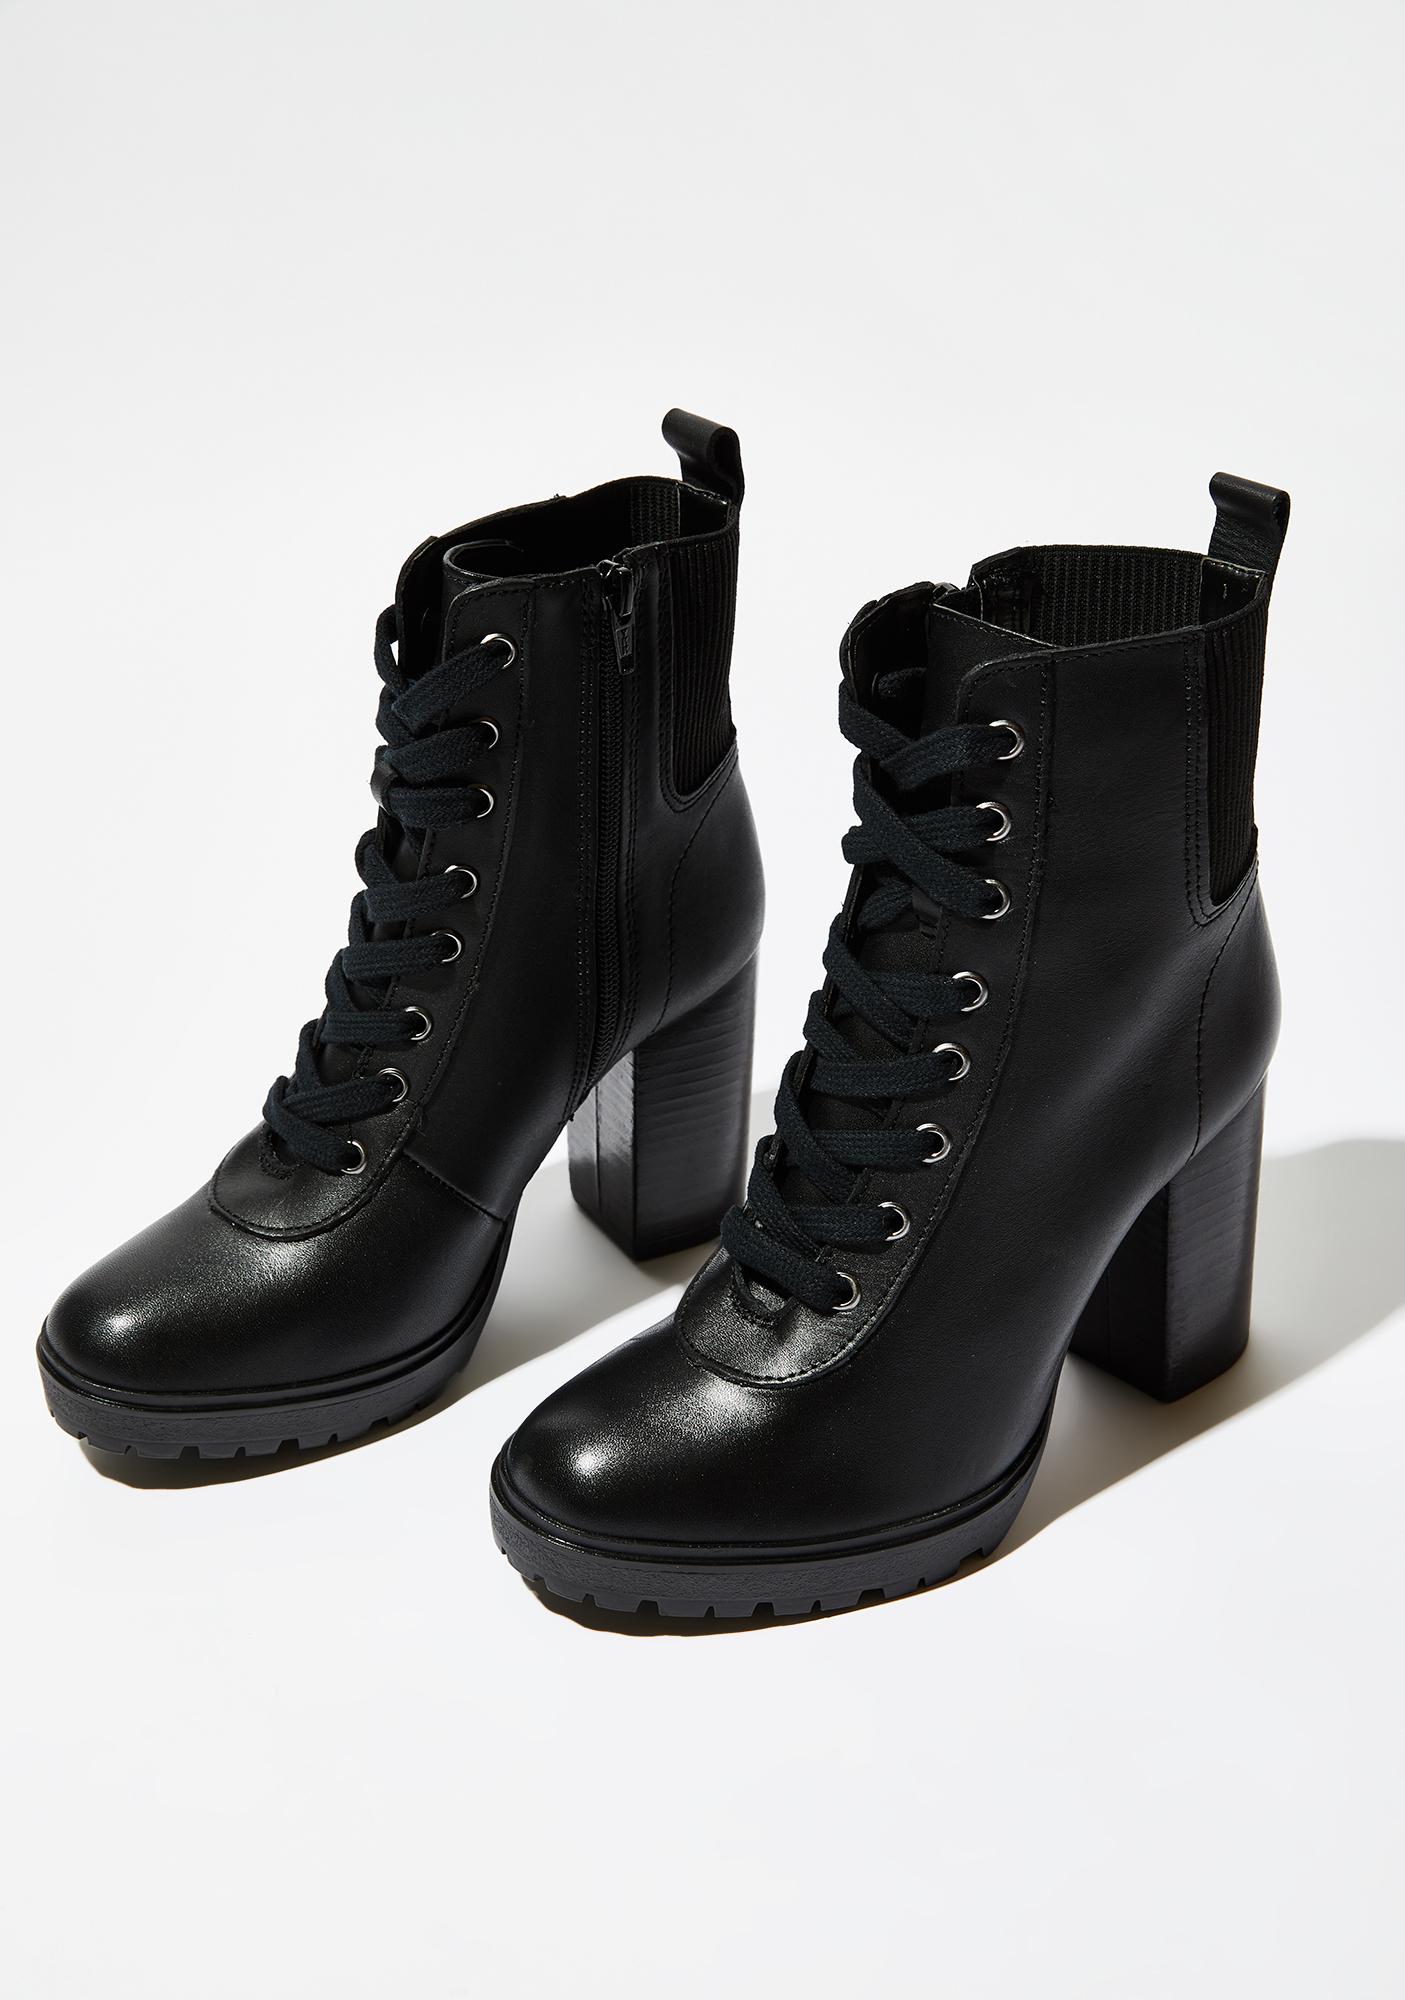 Steve Madden Black Leather Latch Boots 